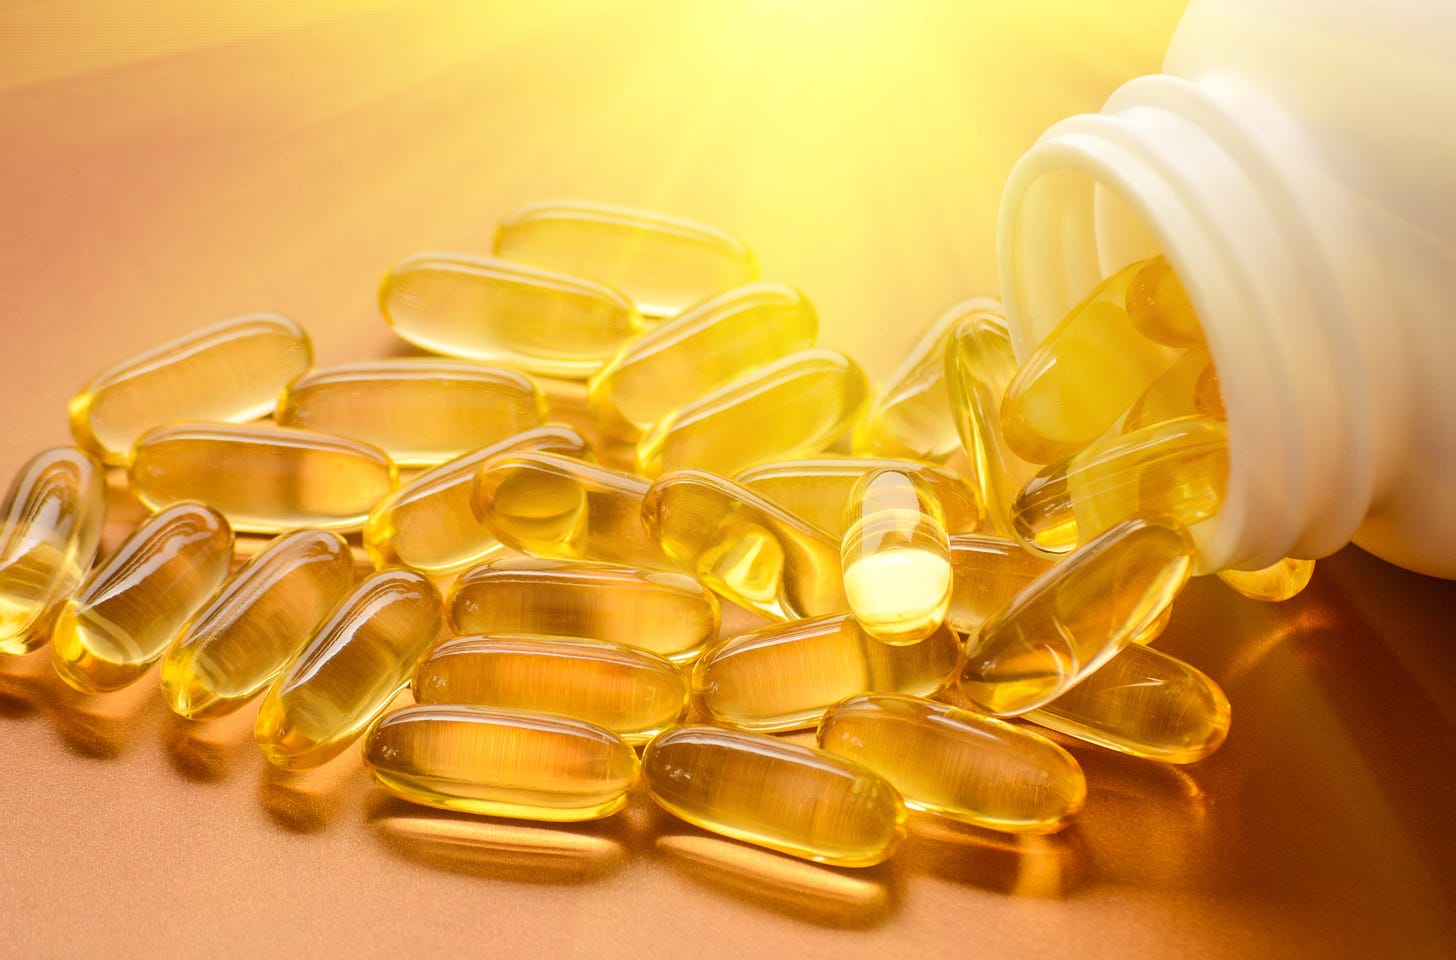 Don't throw away your vitamin D supplements yet - The Washington Post